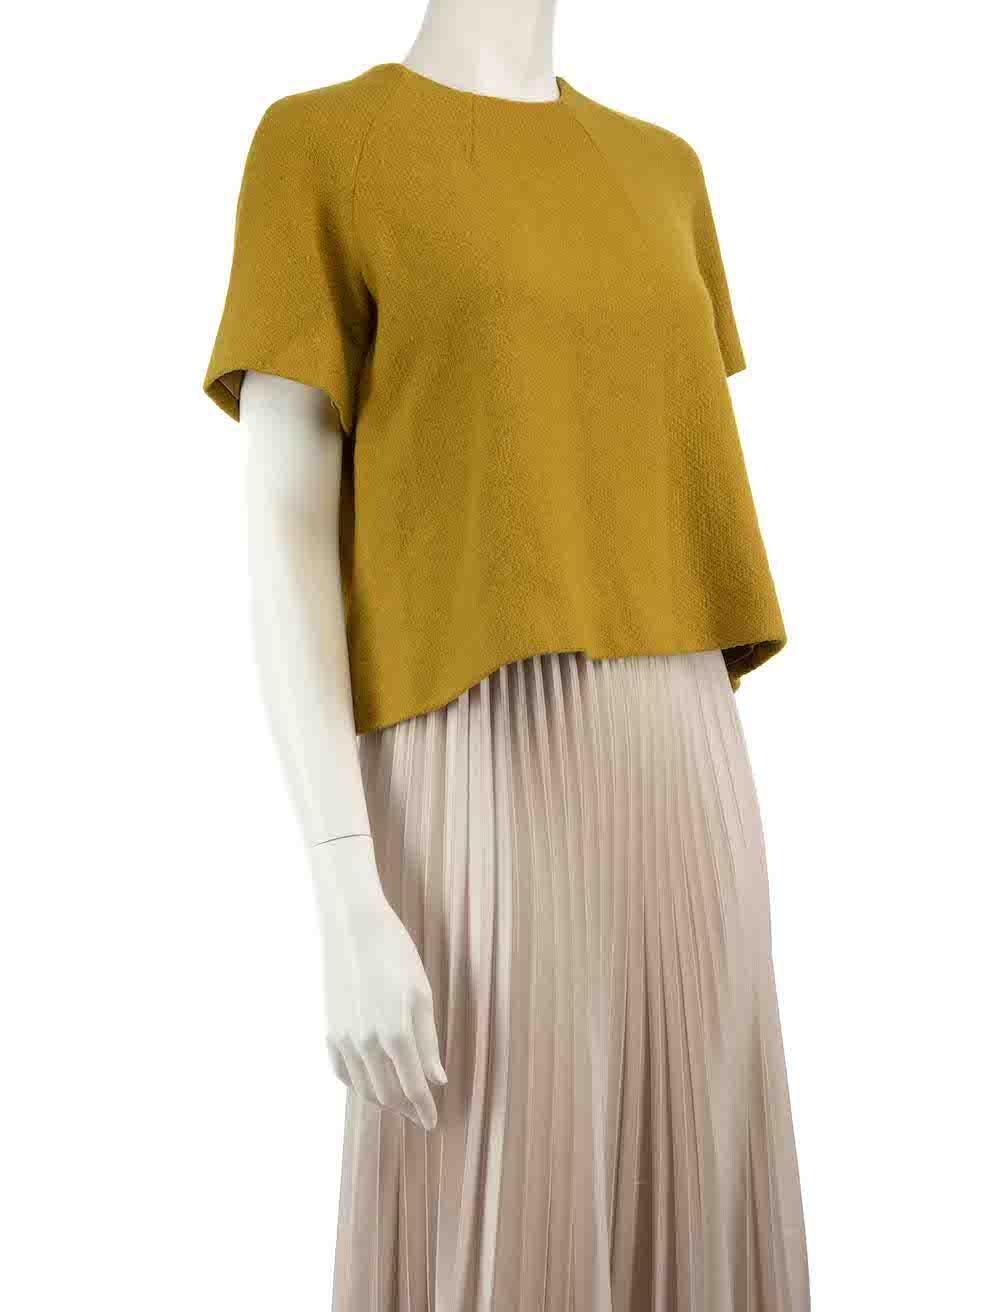 CONDITION is Very good. Minimal wear to top is evident. There is a light mark across the chest area on this used Emilia Wickstead designer resale item.
 
 
 
 Details
 
 
 Green
 
 Wool
 
 Top
 
 Round neck
 
 Short sleeves
 
 Back hook fastening
 
